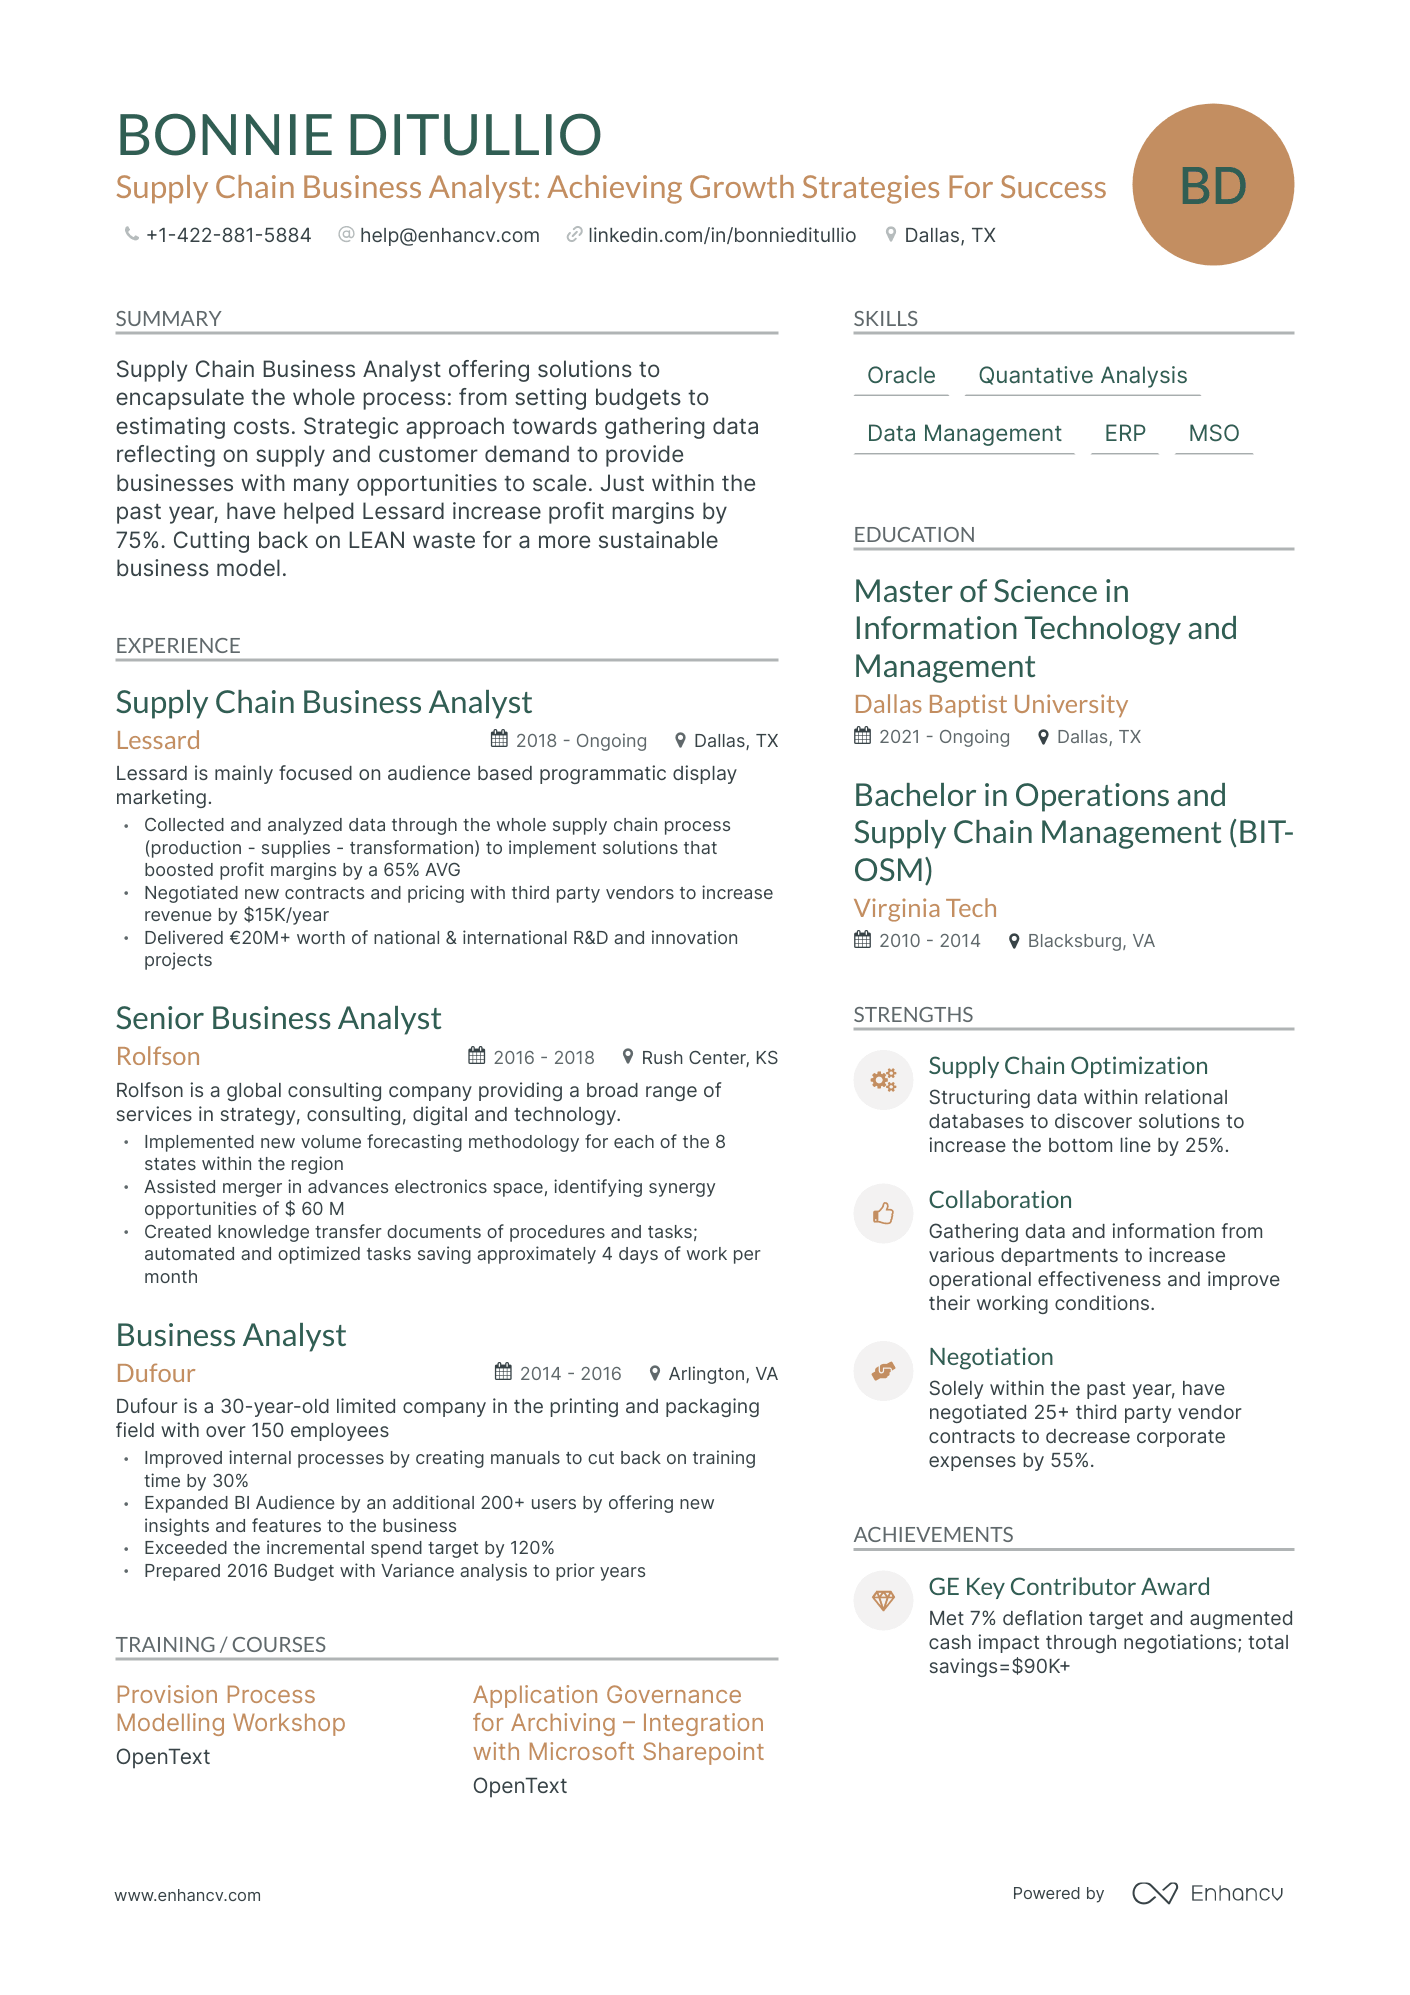 Modern Supply Chain Business Analyst Resume Template